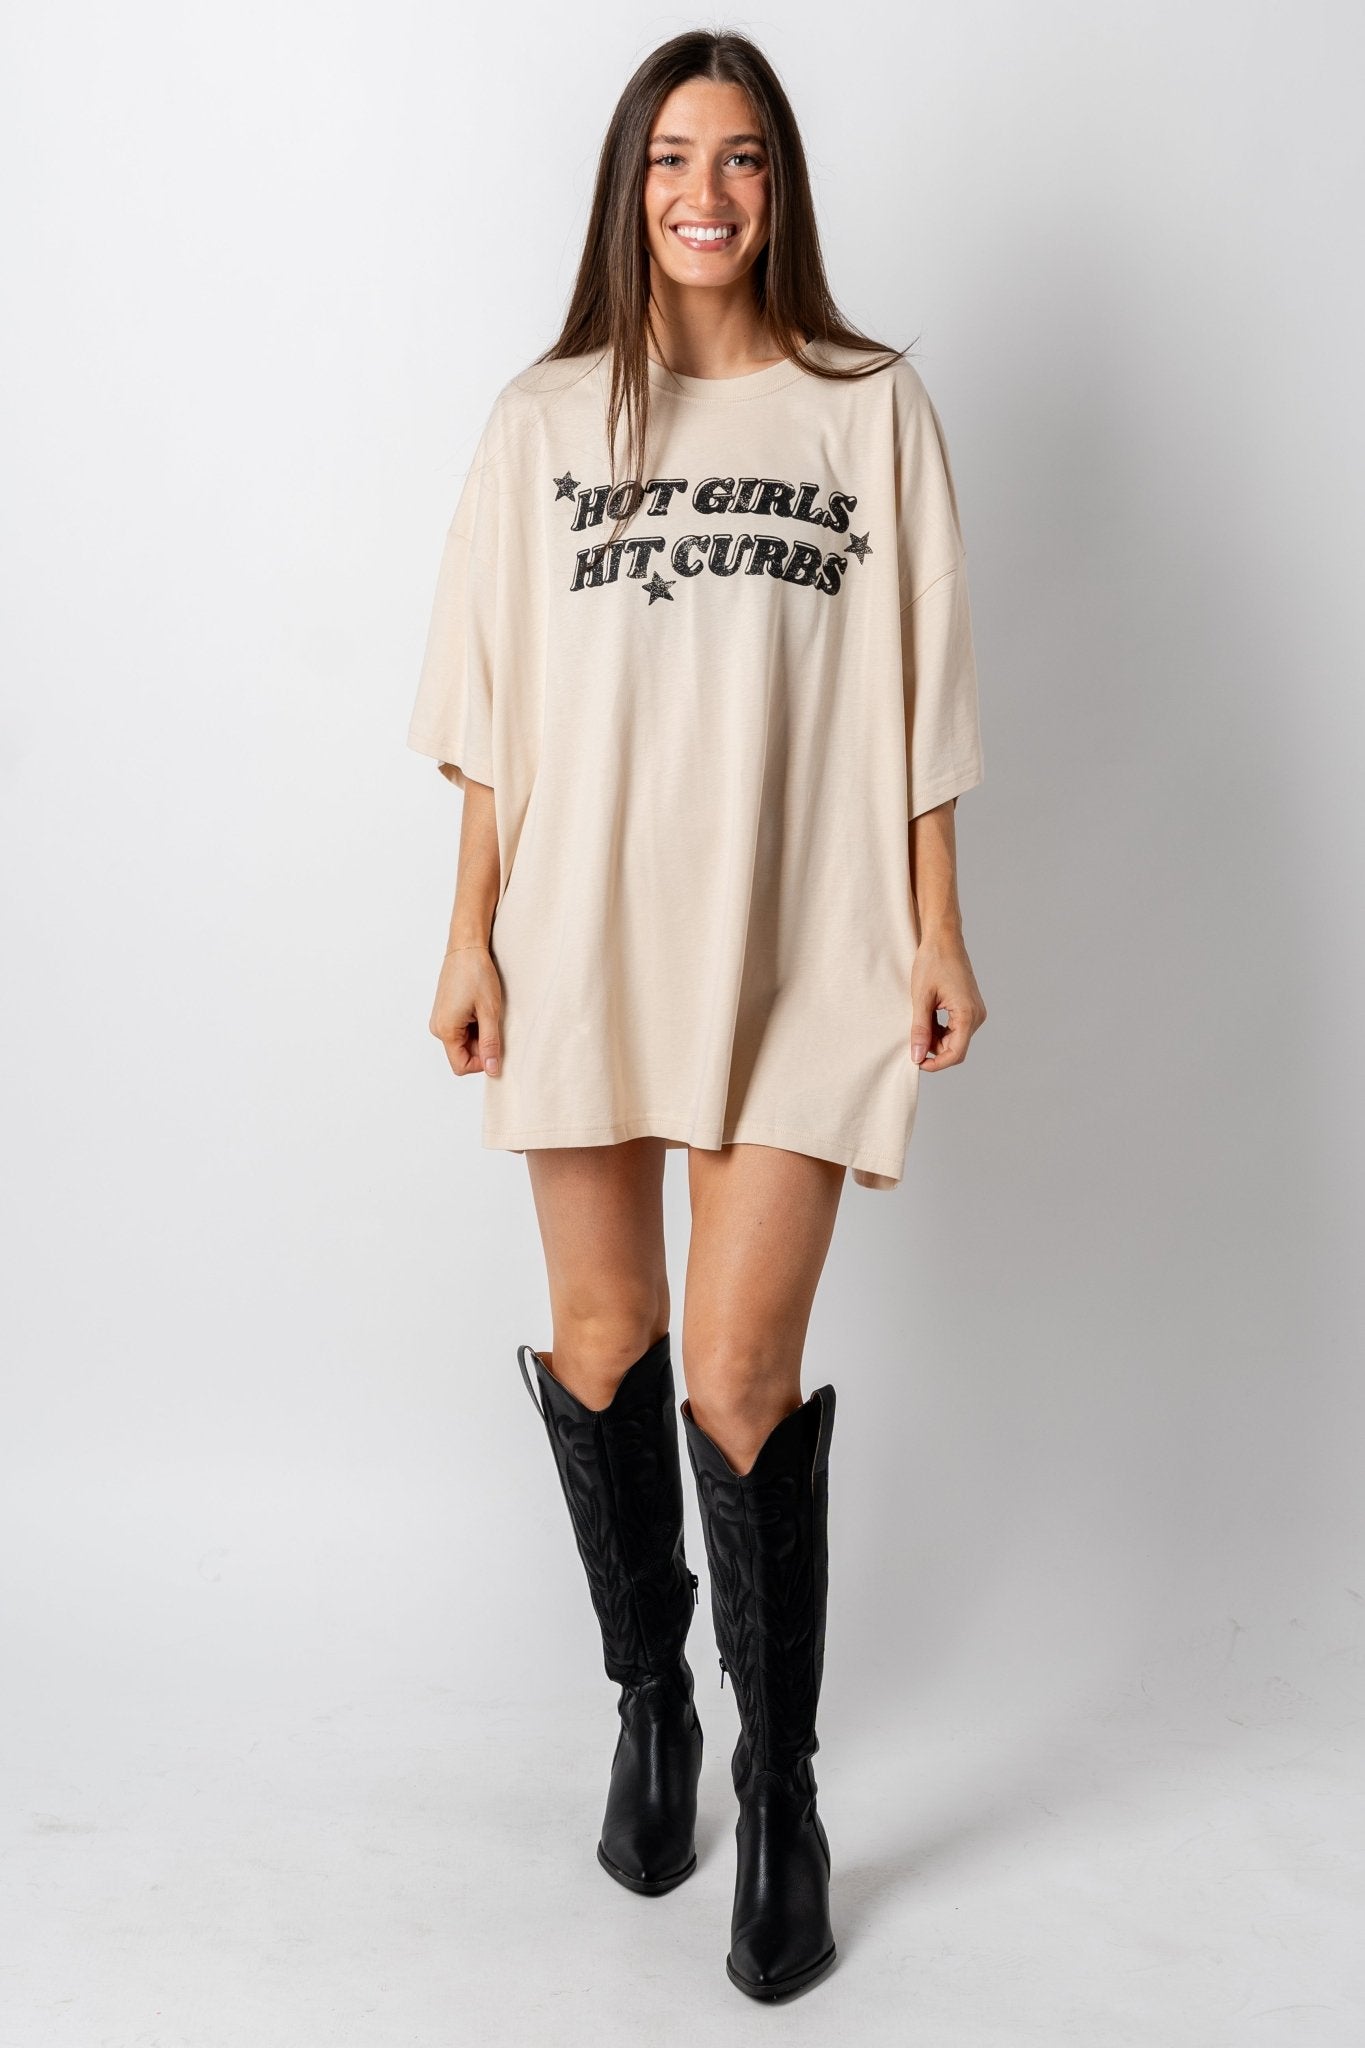 Hot girls hit curbs oversized t-shirt off white - Trendy T-shirts - Cute Graphic Tee Fashion at Lush Fashion Lounge Boutique in Oklahoma